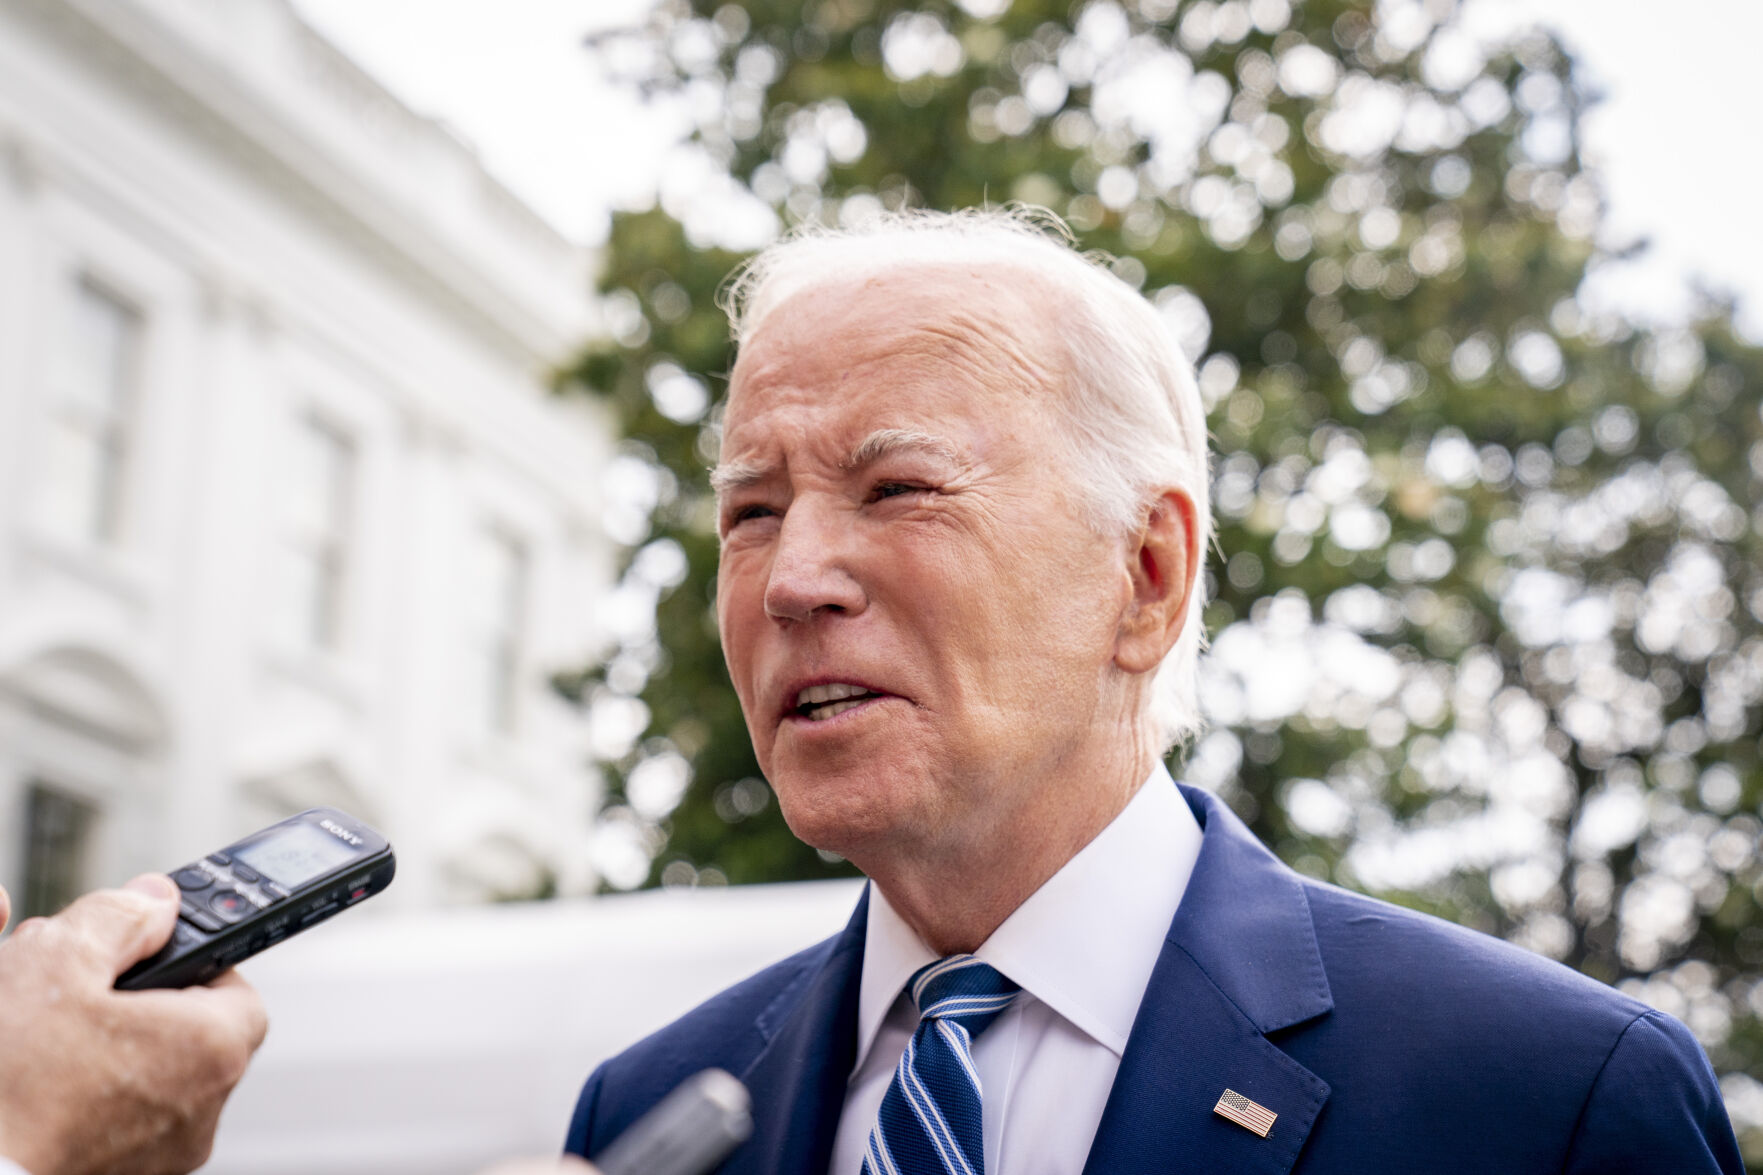 <p>President Joe Biden speaks with members of the media before boarding Marine One on the South Lawn of the White House in Washington, Wednesday, June 28, 2023, for a short trip to Andrews Air Force Base, Md., and then on to Chicago. (AP Photo/Andrew Harnik)</p>   PHOTO CREDIT: Andrew Harnik 